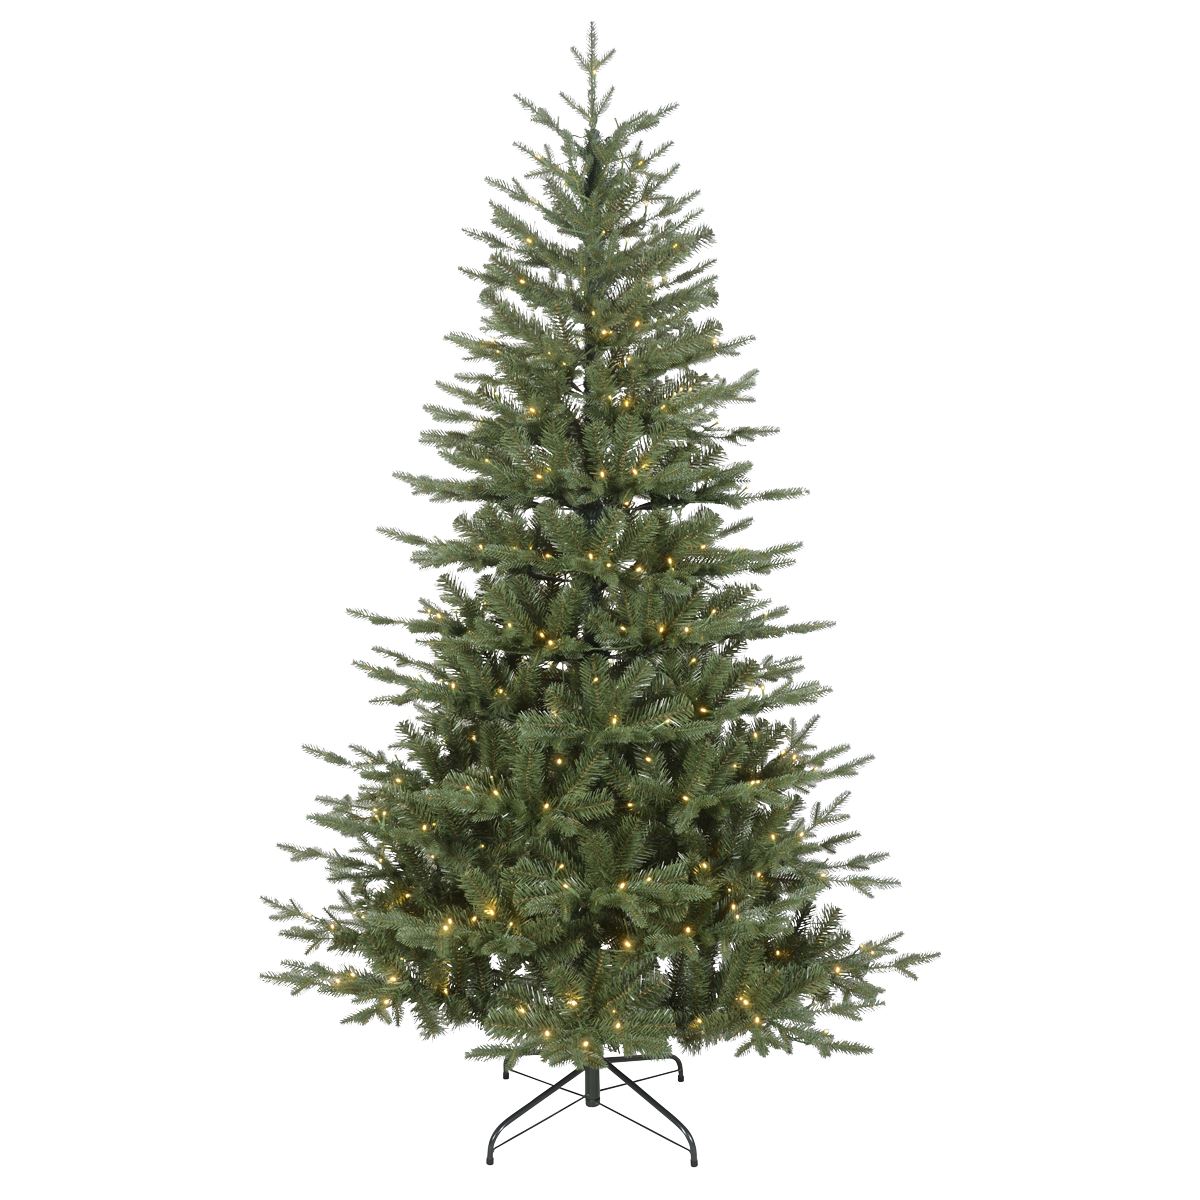 Dellonda Pre-Lit 5ft Hinged Christmas Tree with Warm White LED Lights & PE/PVC Tips